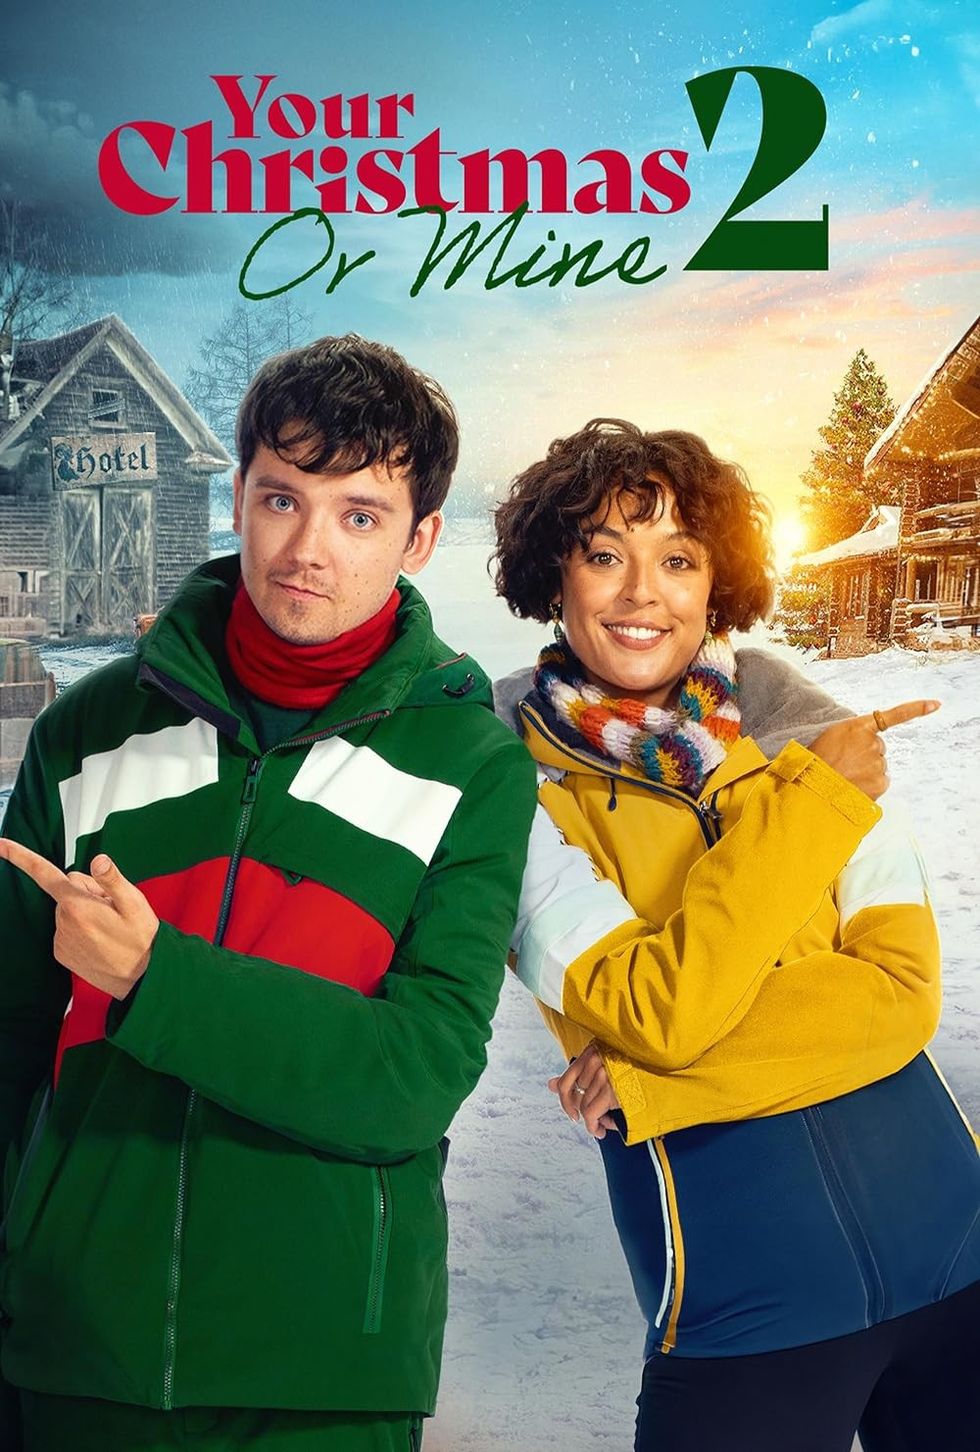 Your Christmas Or Mine 2 asa butterfield cora kirk winter movies